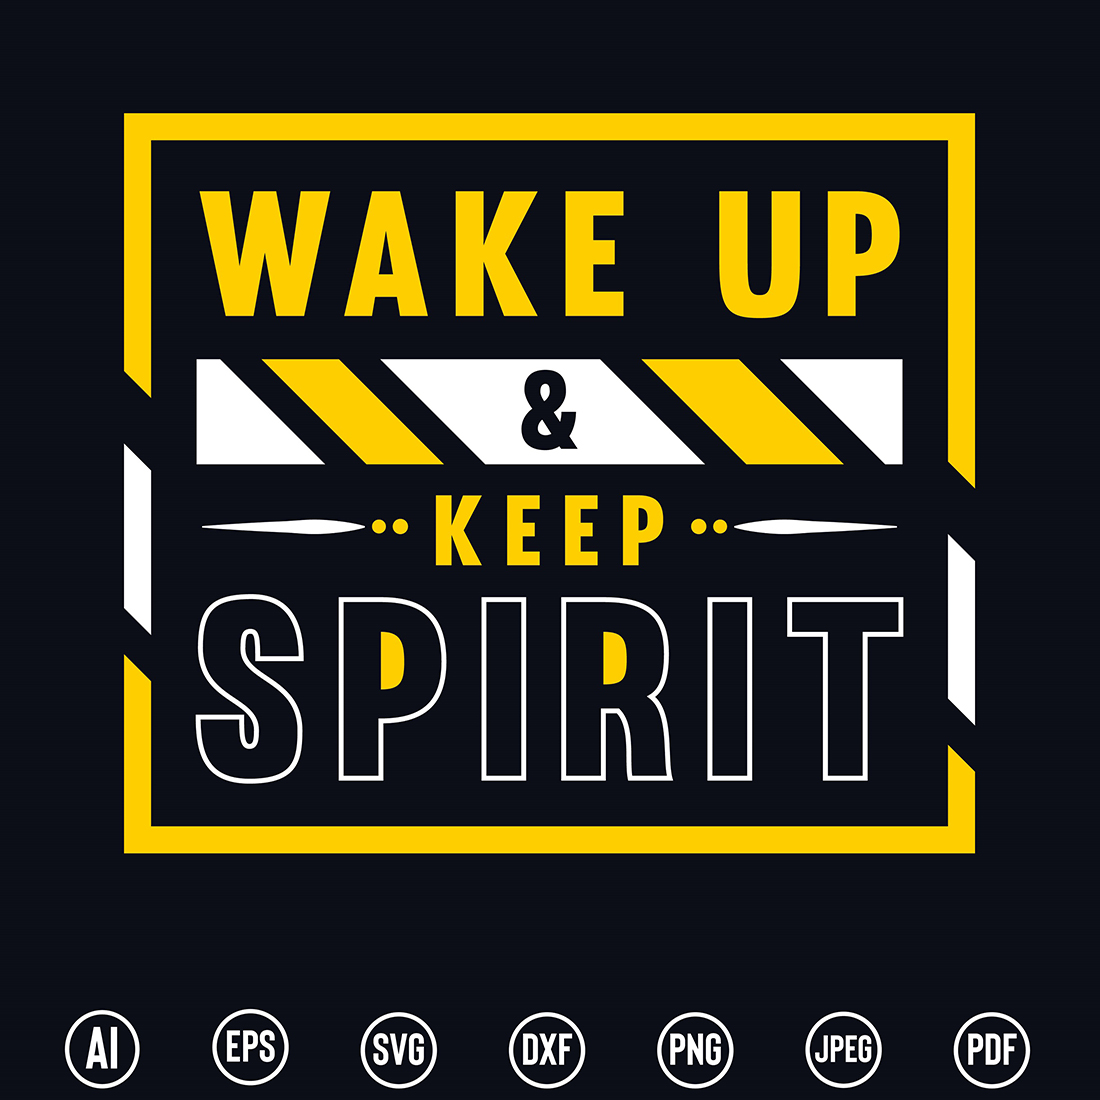 Modern Typography T-Shirt design with “Wake Up & Keep Spirit” quote for t-shirt, posters, stickers, mug prints, banners, gift cards, labels etc preview image.